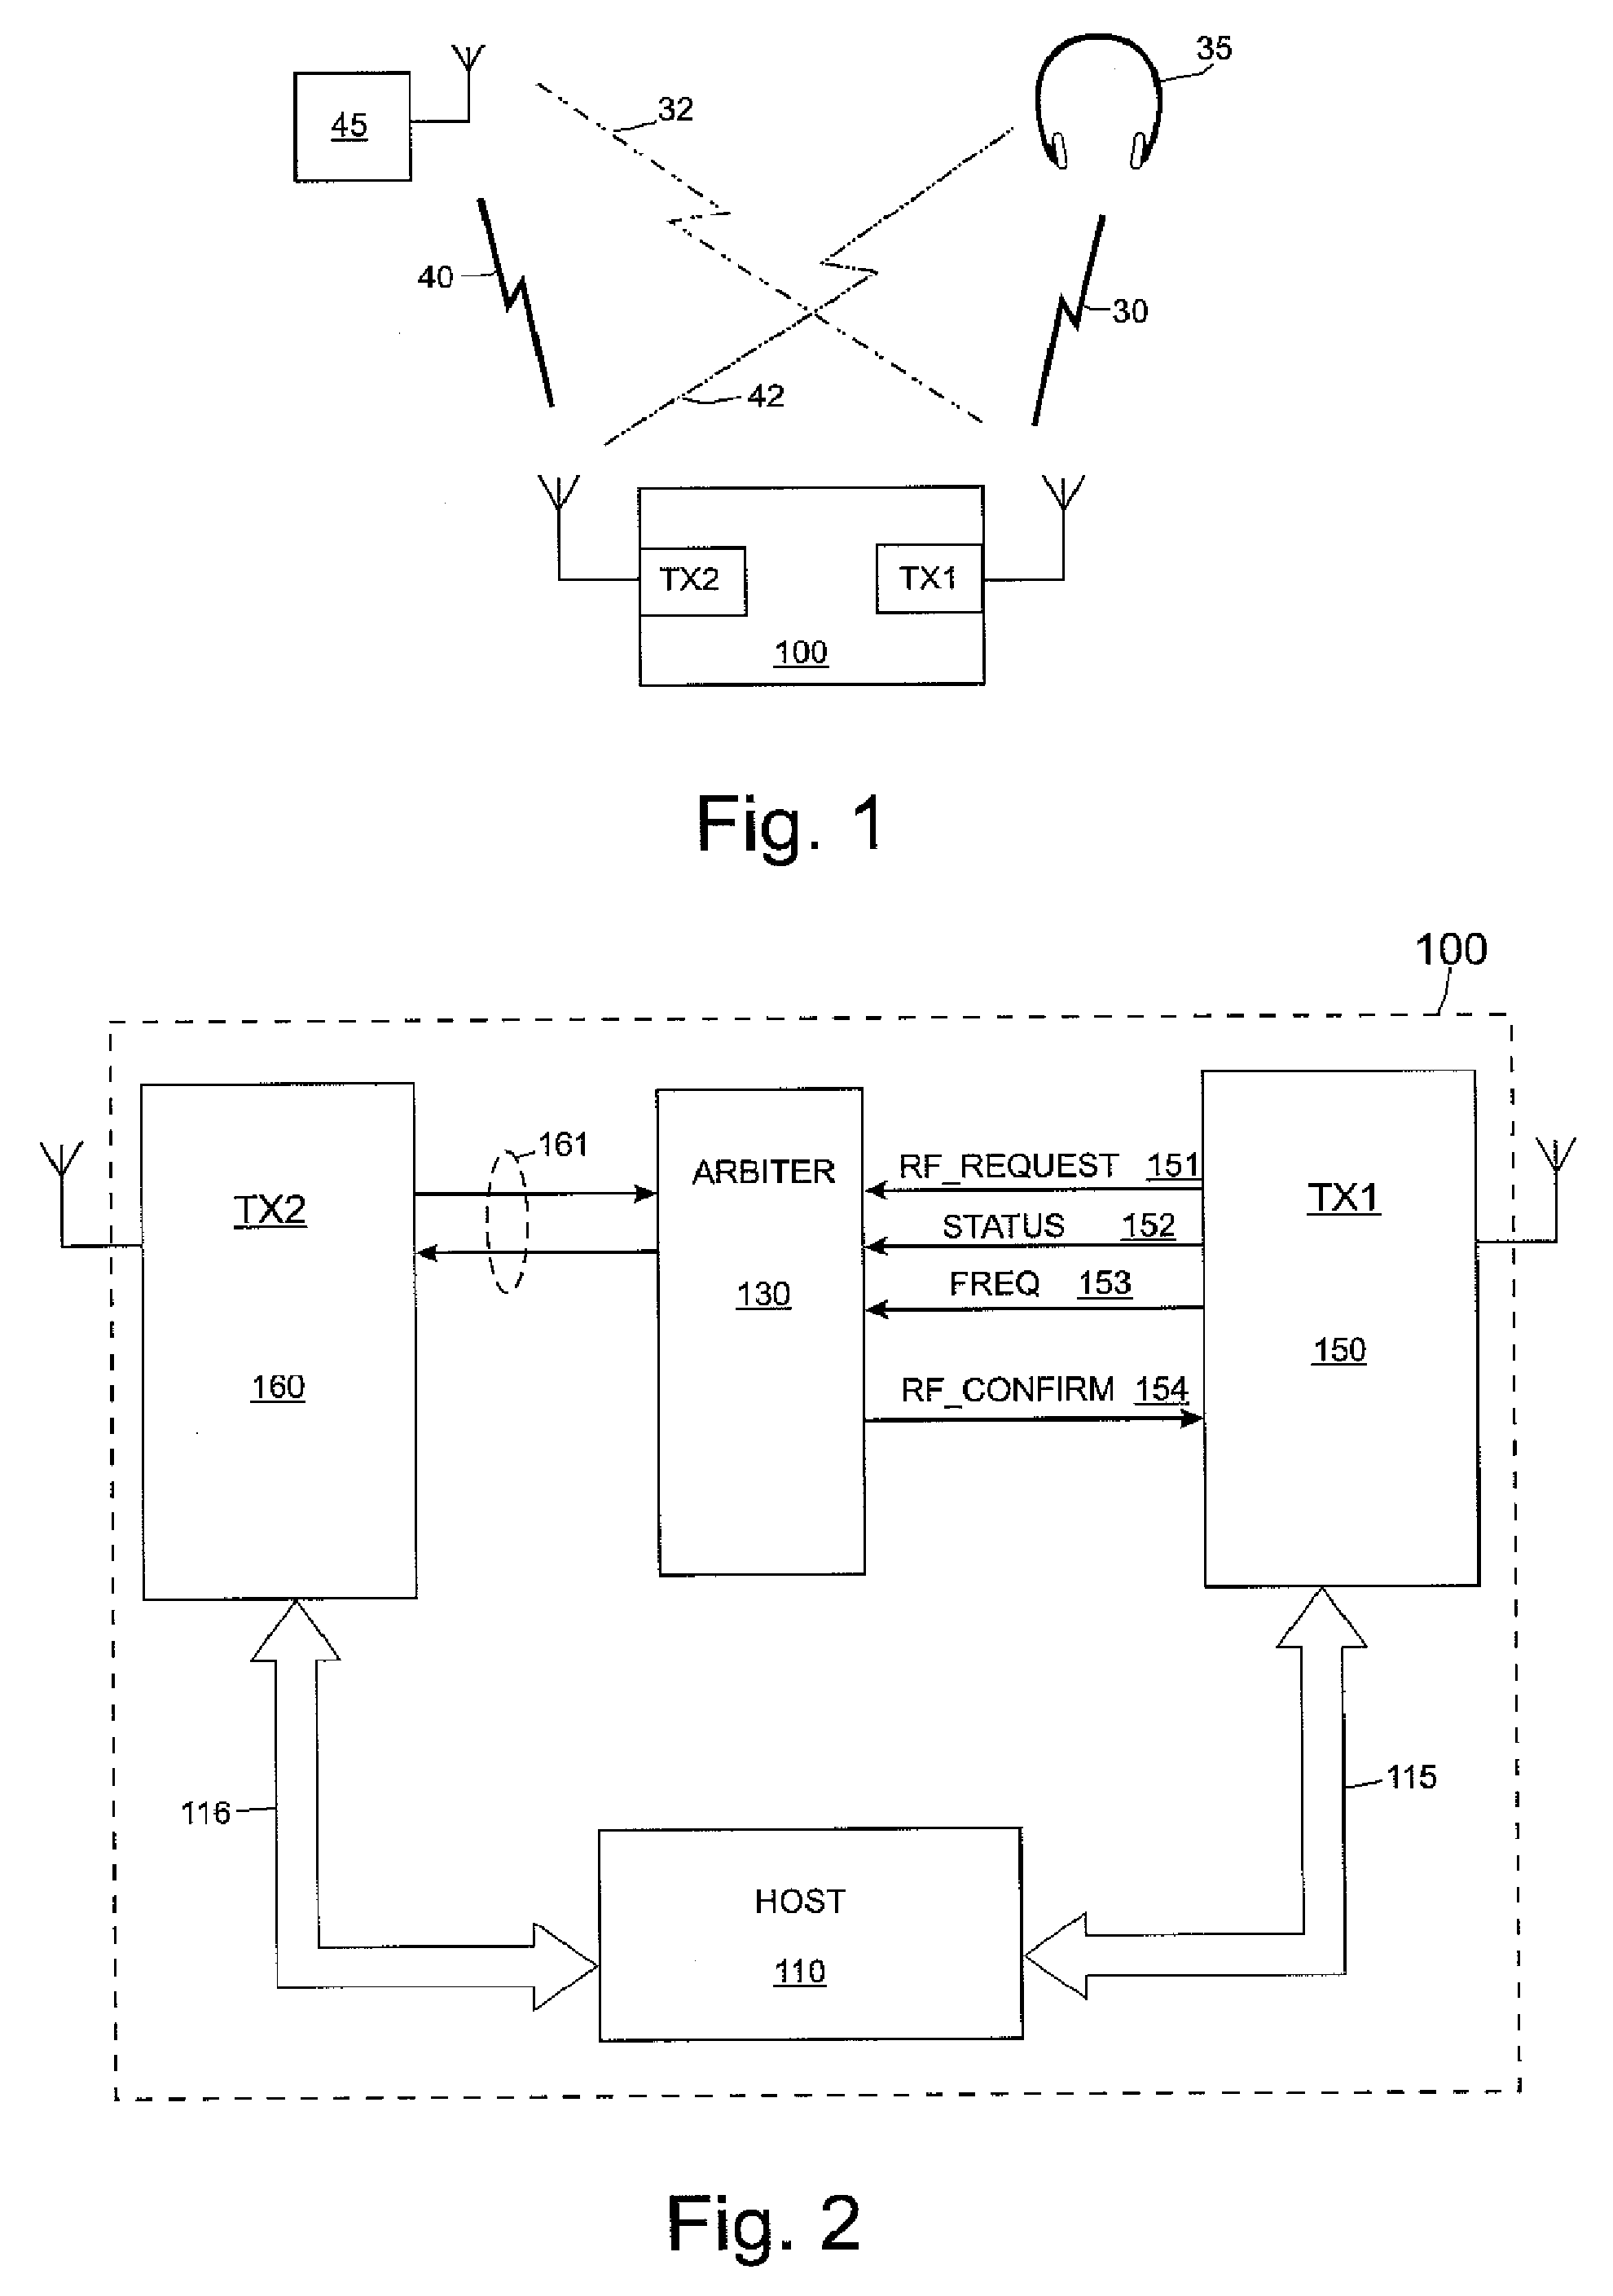 Coexistence of wireless personal area network and wireless local area network